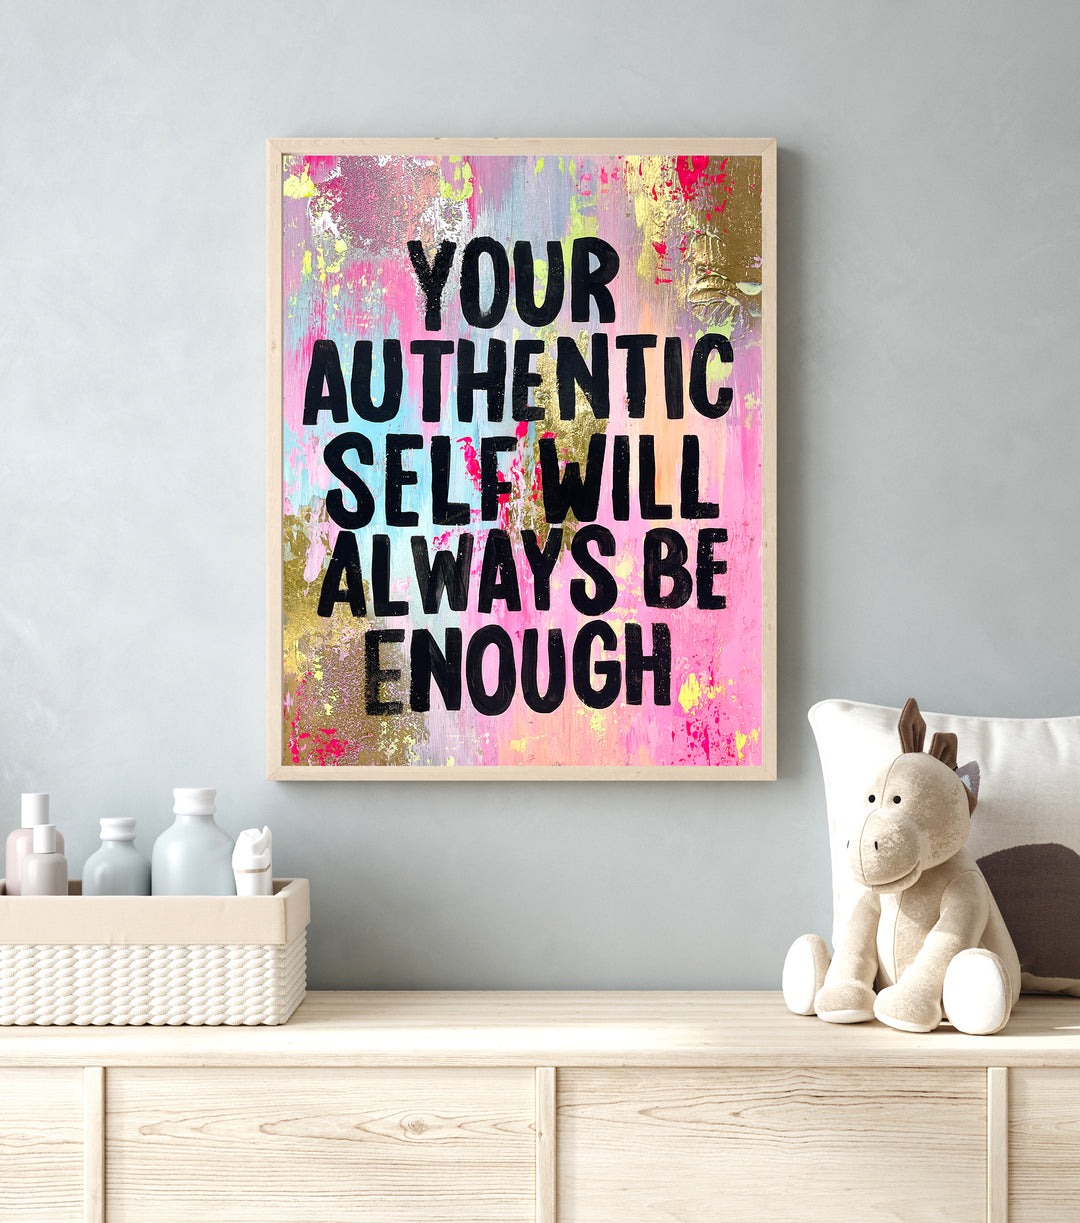 You are authentic and enough - A3